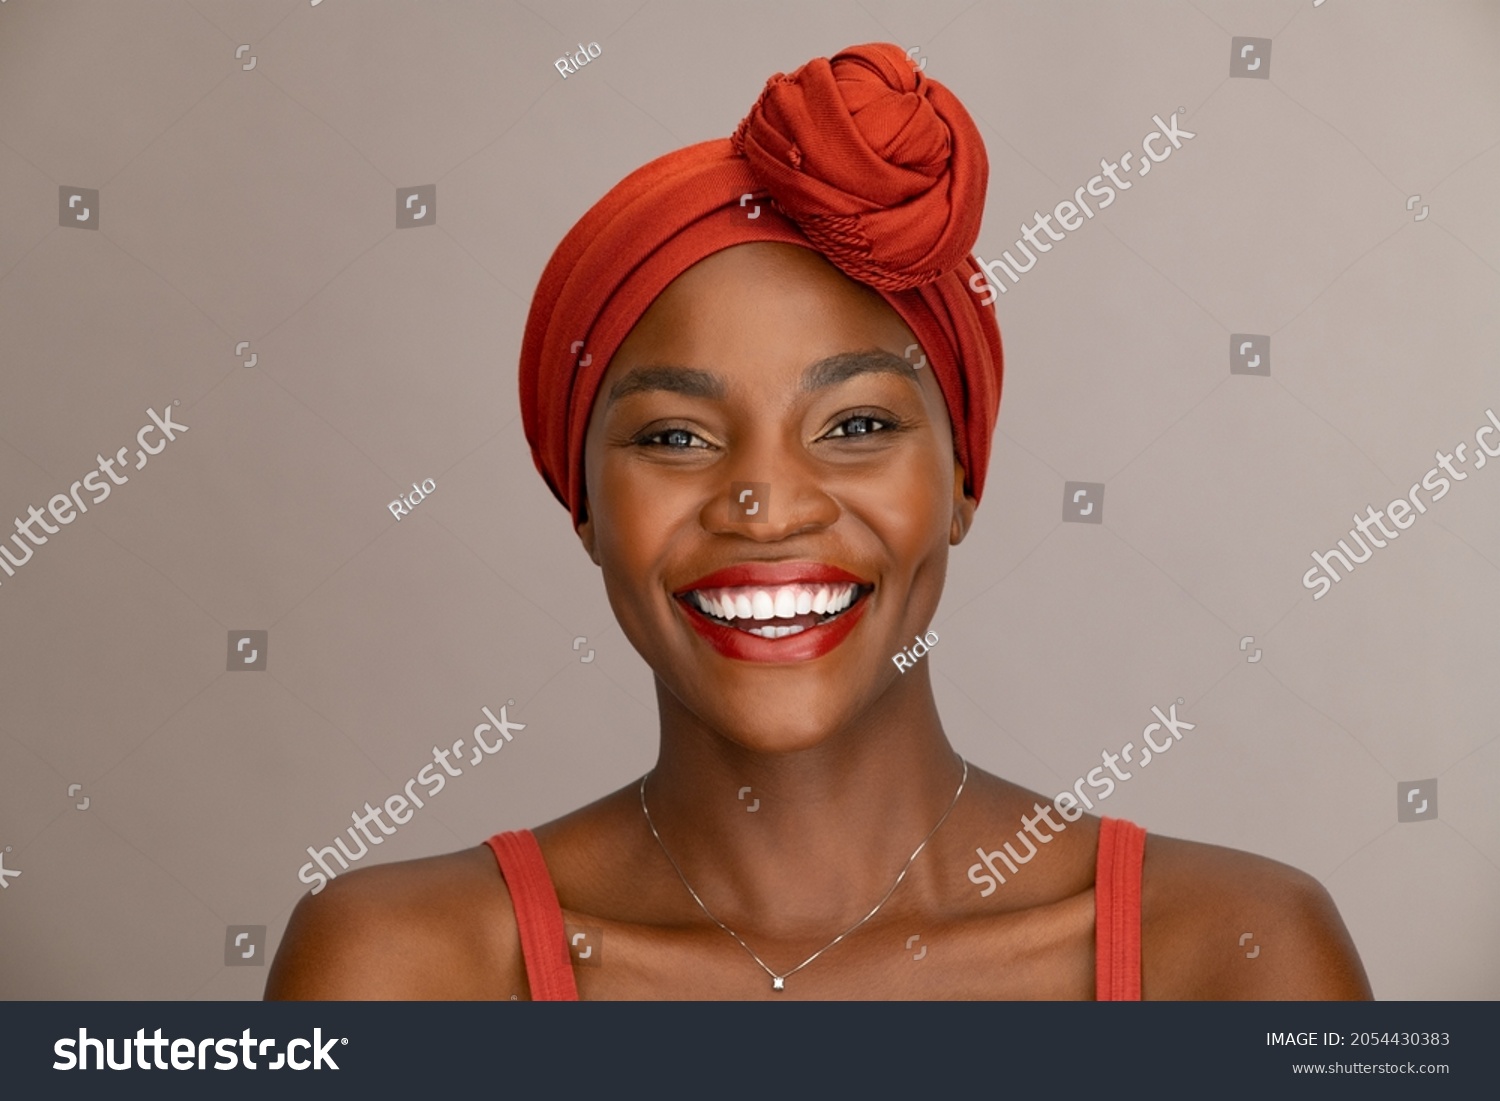 Portrait of beautiful african woman with red headscarf against brown background with copy space. Cheerful black mid woman wearing ethnicity headband. Mature happy lady with traditional clothes. #2054430383